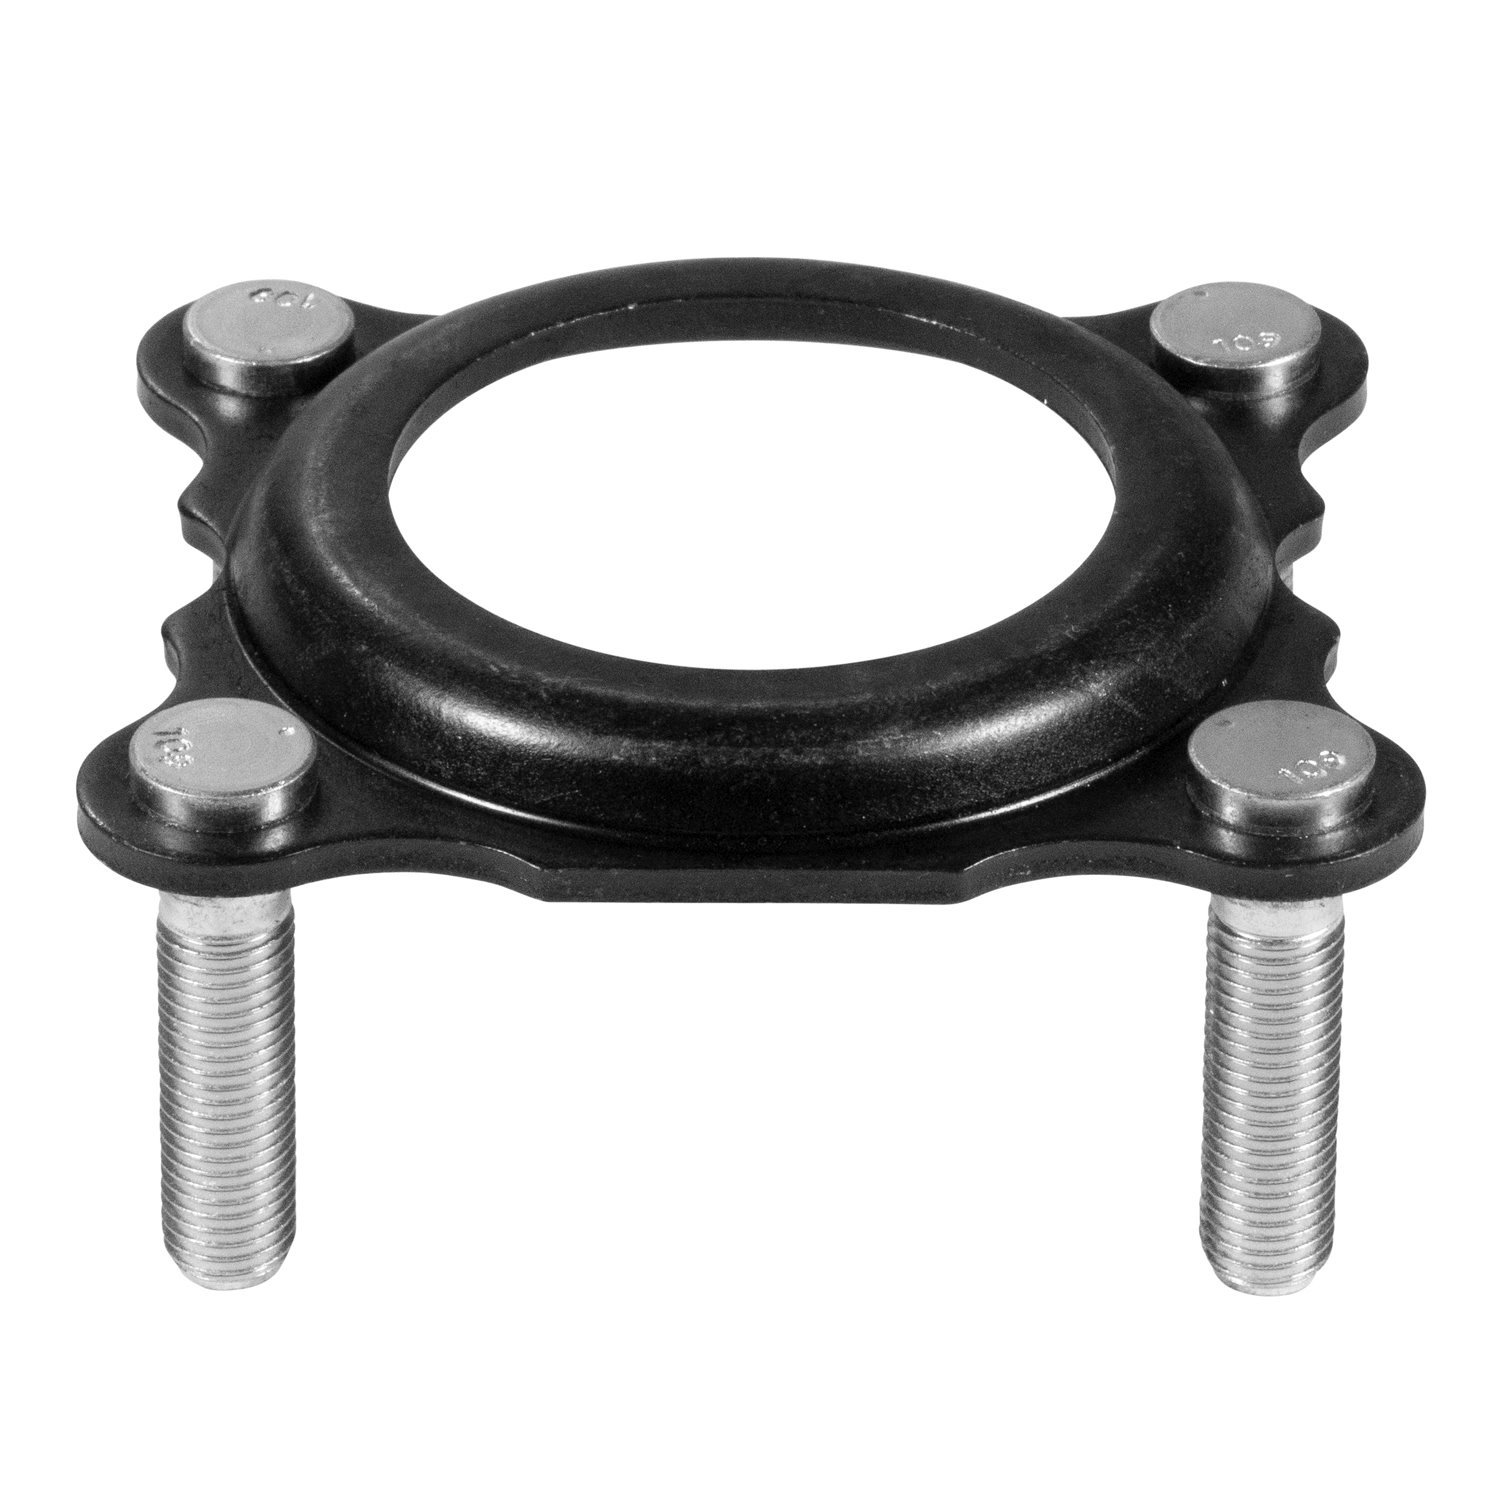 Rear Axle Bearing Retainer For Dana 35, With